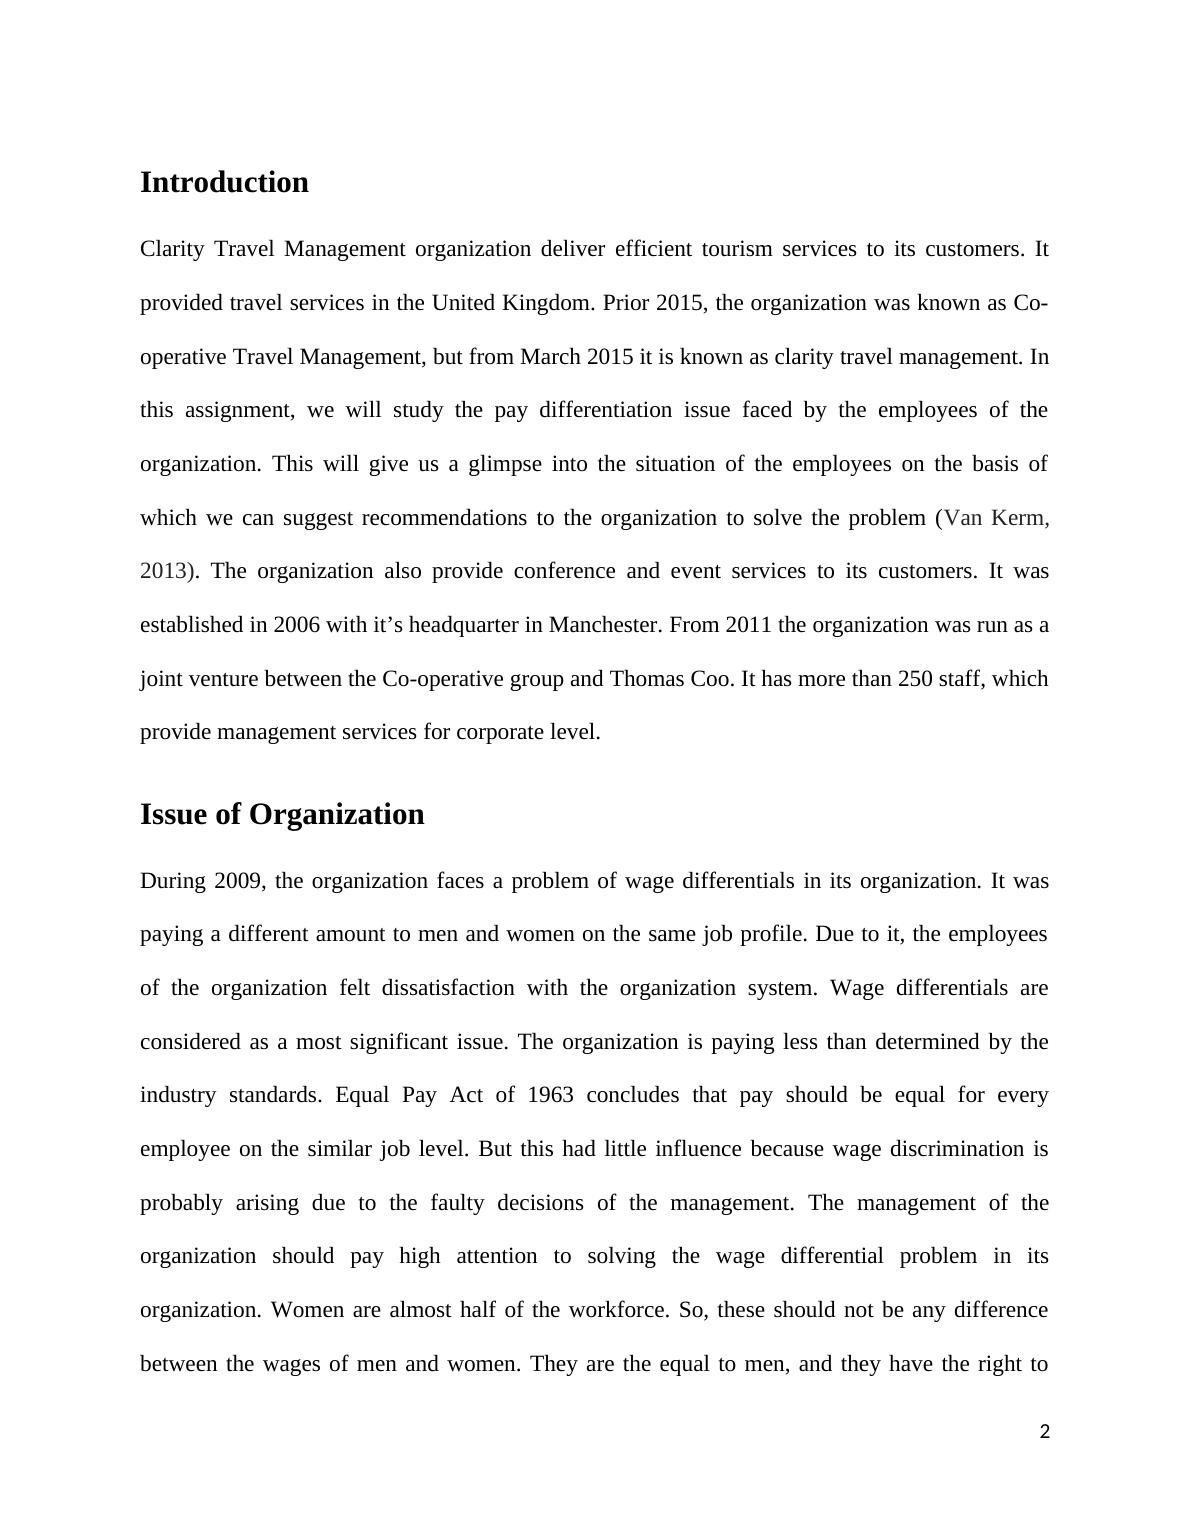 Assignment on Pay Differentiation in Employee_3